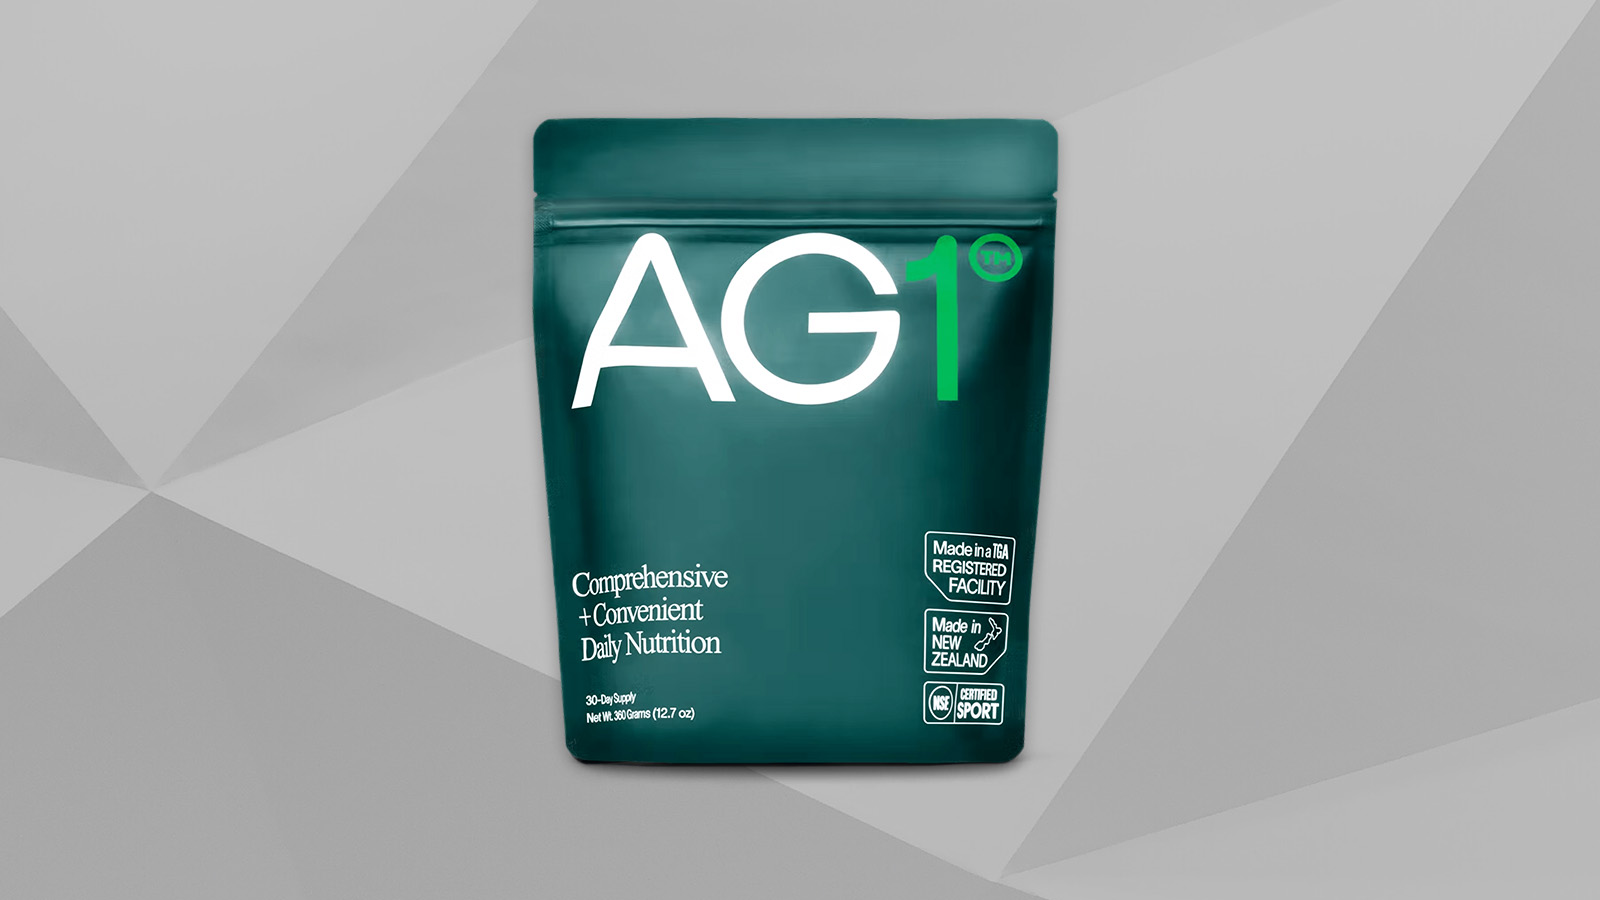 Will AG1 Actually Cover All Your Nutritional Needs? (2023 Review